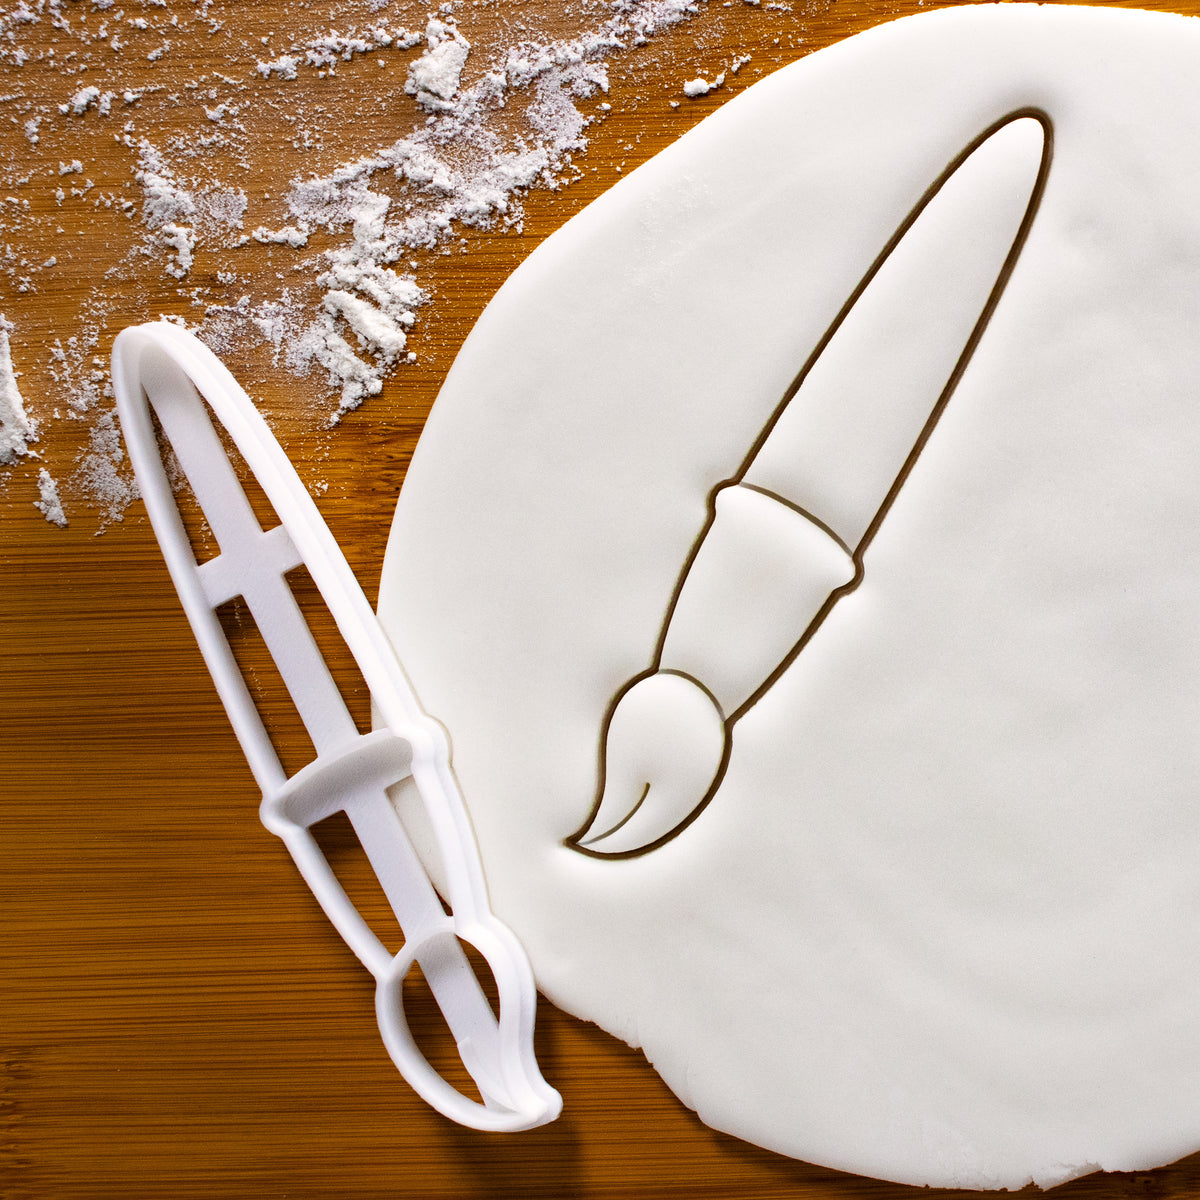 Paintbrush Cookie Cutter pressed on fondant